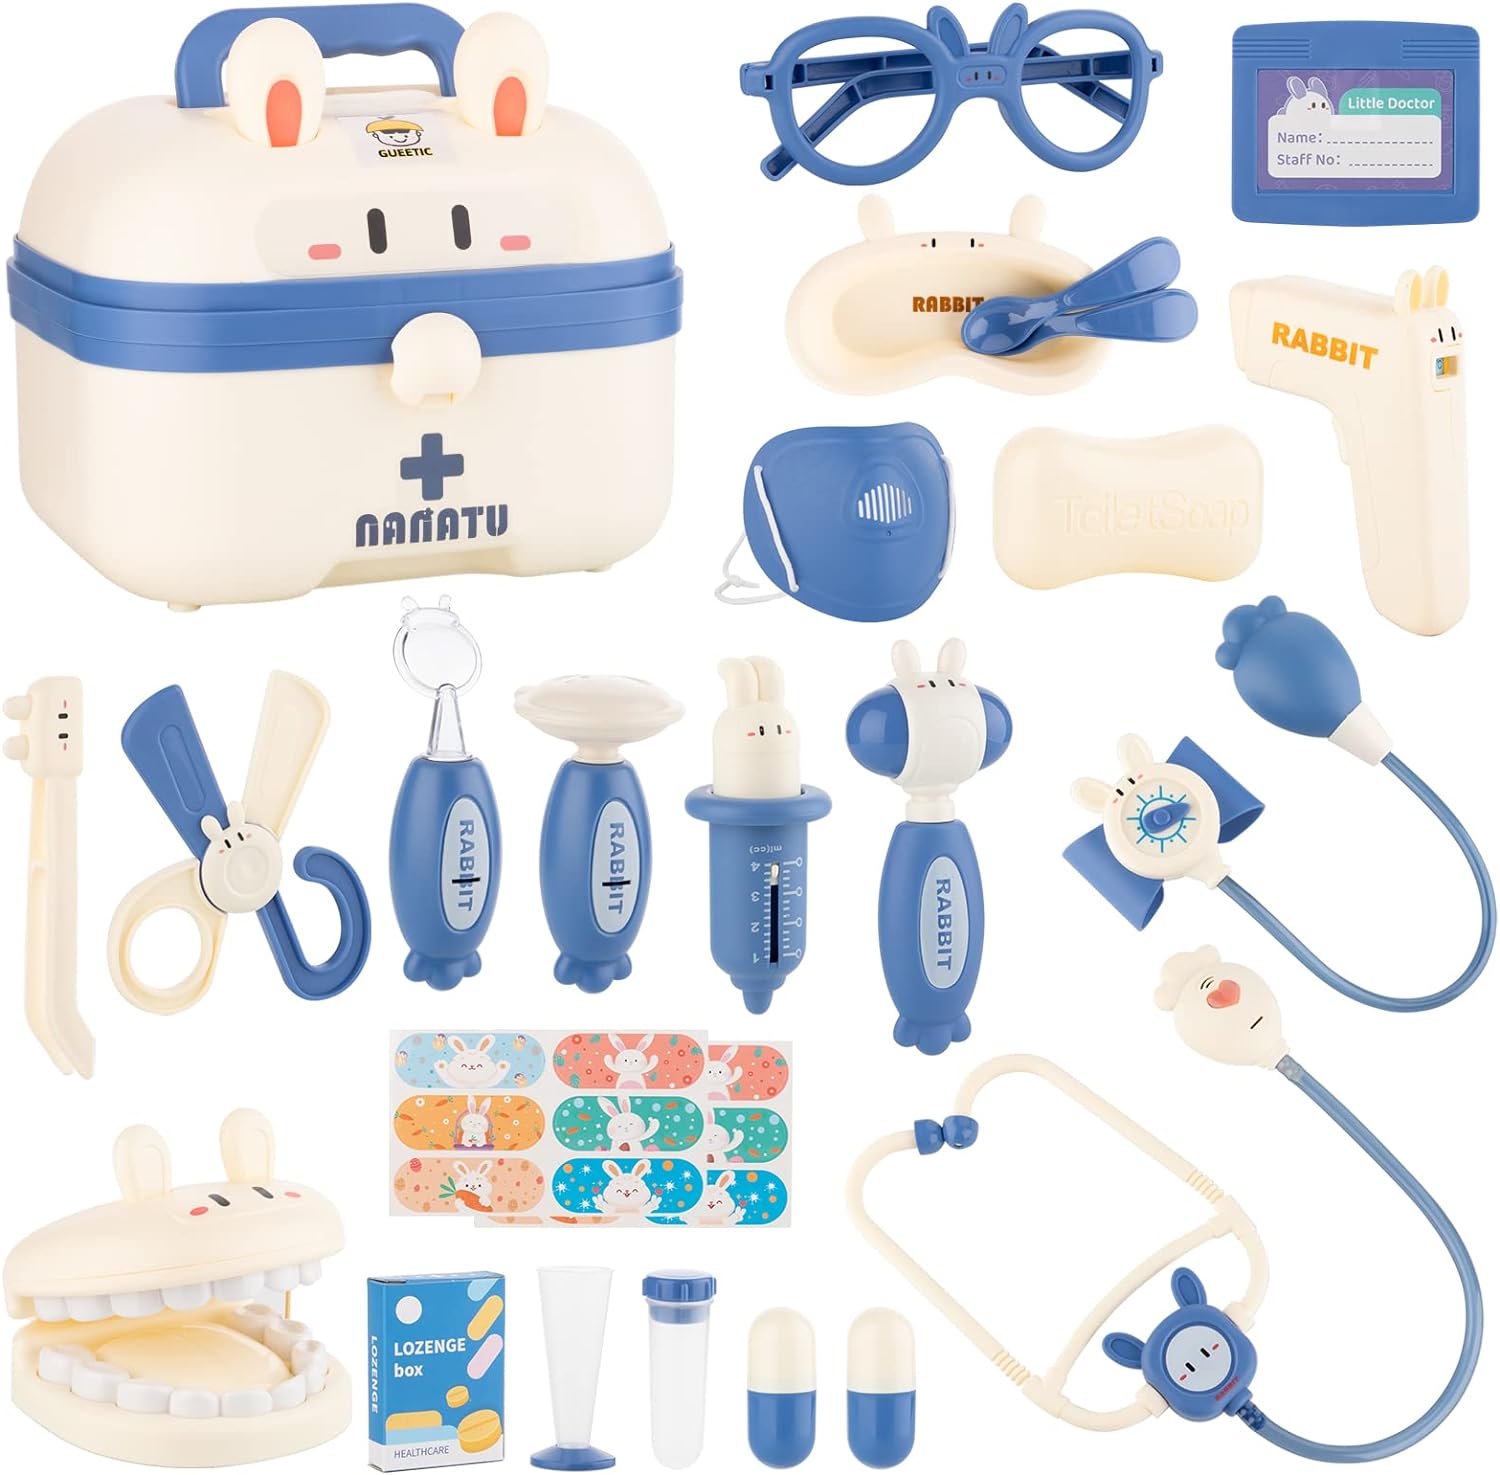 GUEETIC Doctor Kit for Kids - Pretend Play Educational Doctor Toys, Medical Kit with Stethoscope, Doctor Playset for Dentist Doctor, Role Play Toys for 3 4 5 6 7 8 Years Old Girls Boys Toddler Gifts